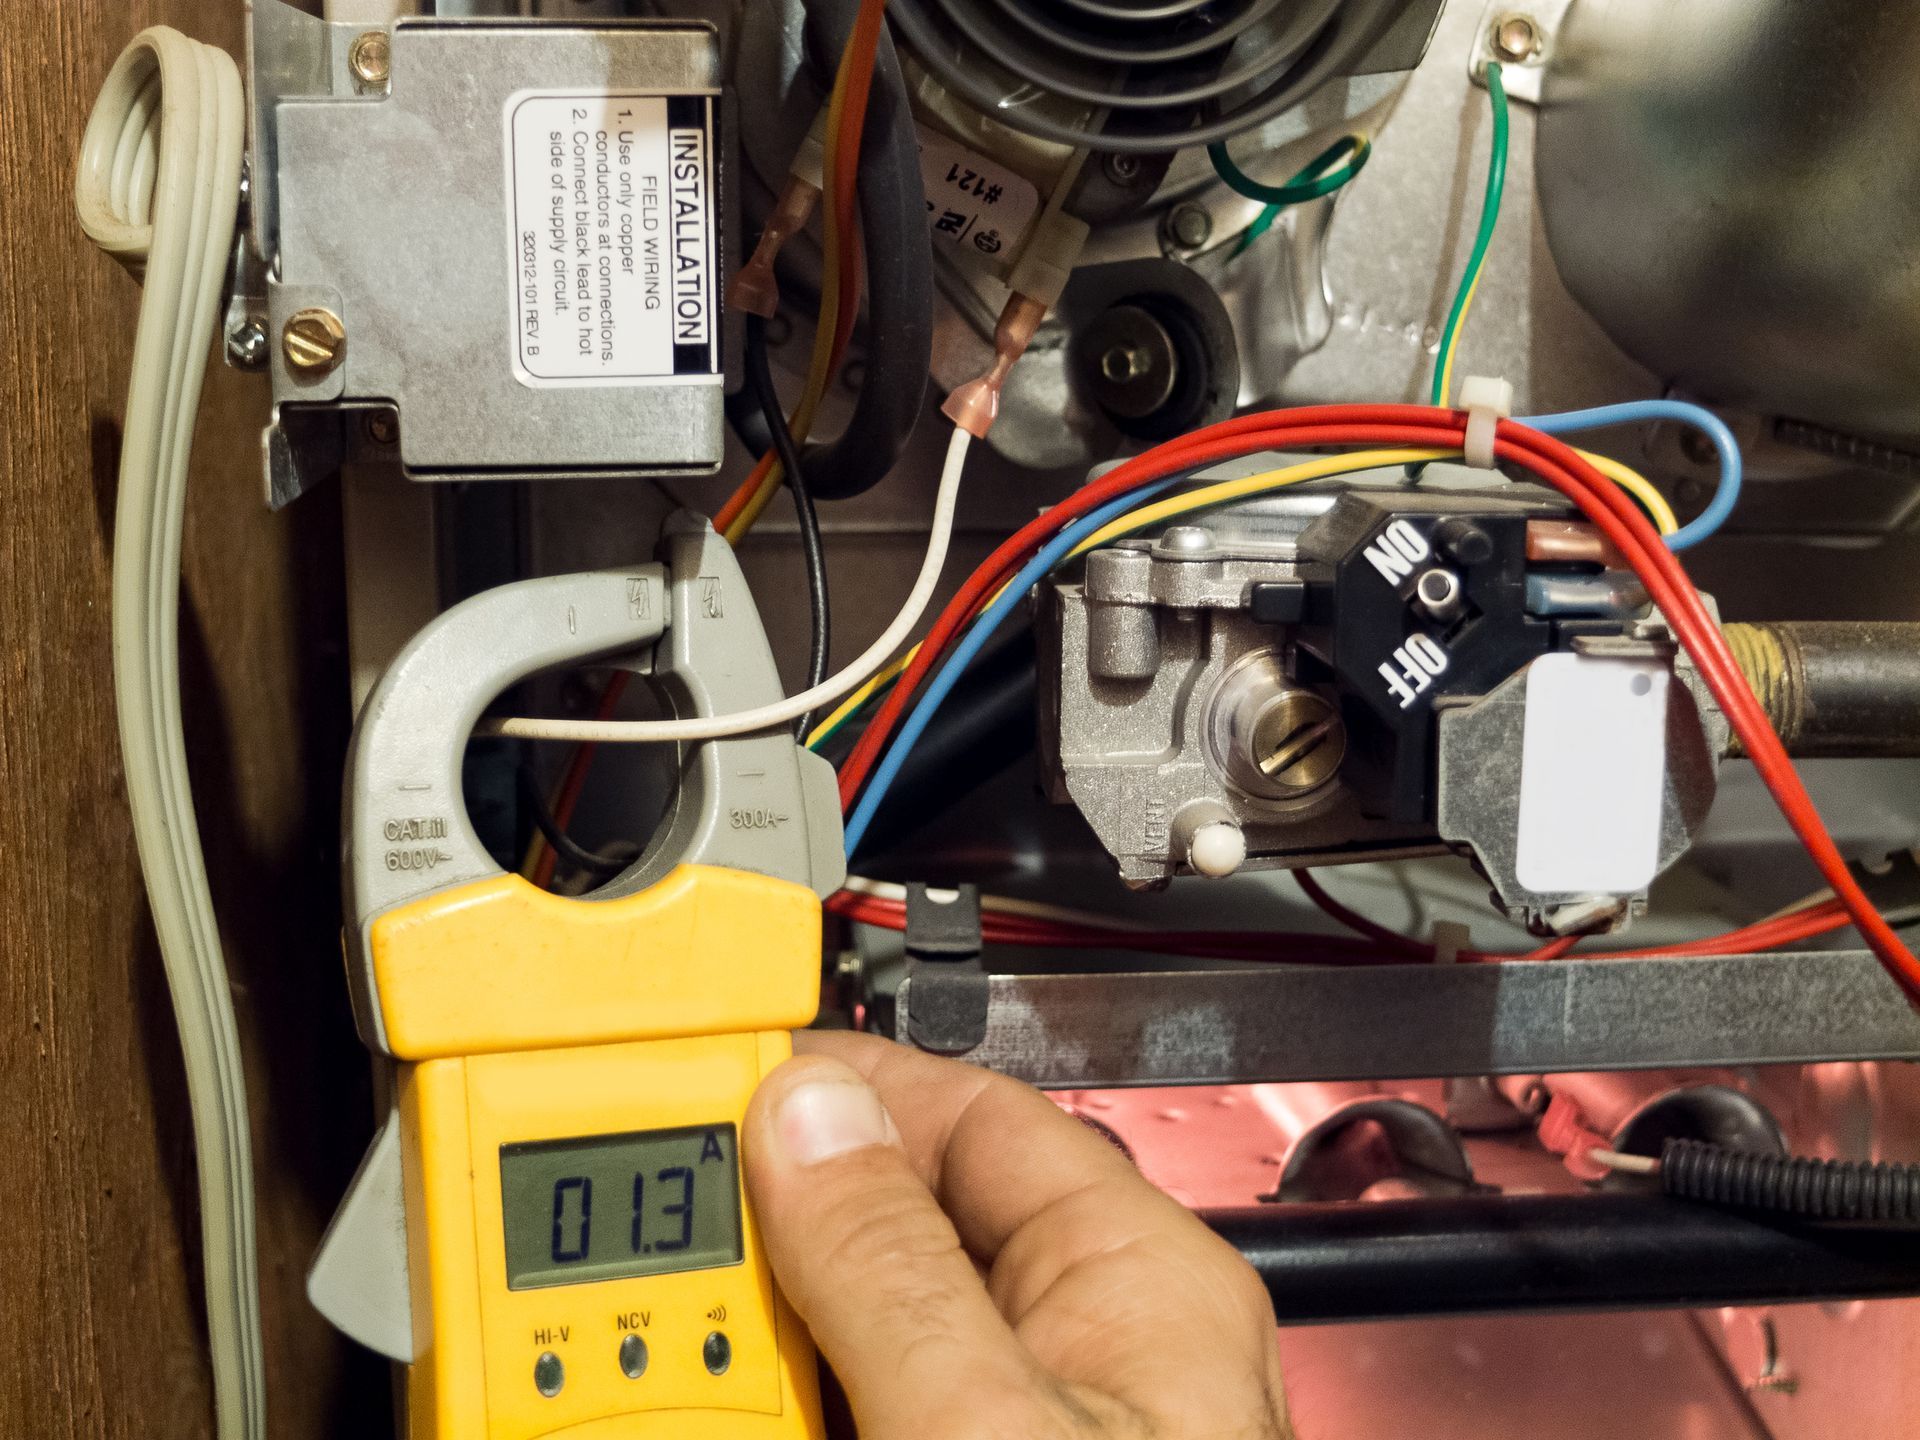 An experienced technician repairing a furnace, carefully examining the components and making adjustments to ensure proper functionality and efficient heating.